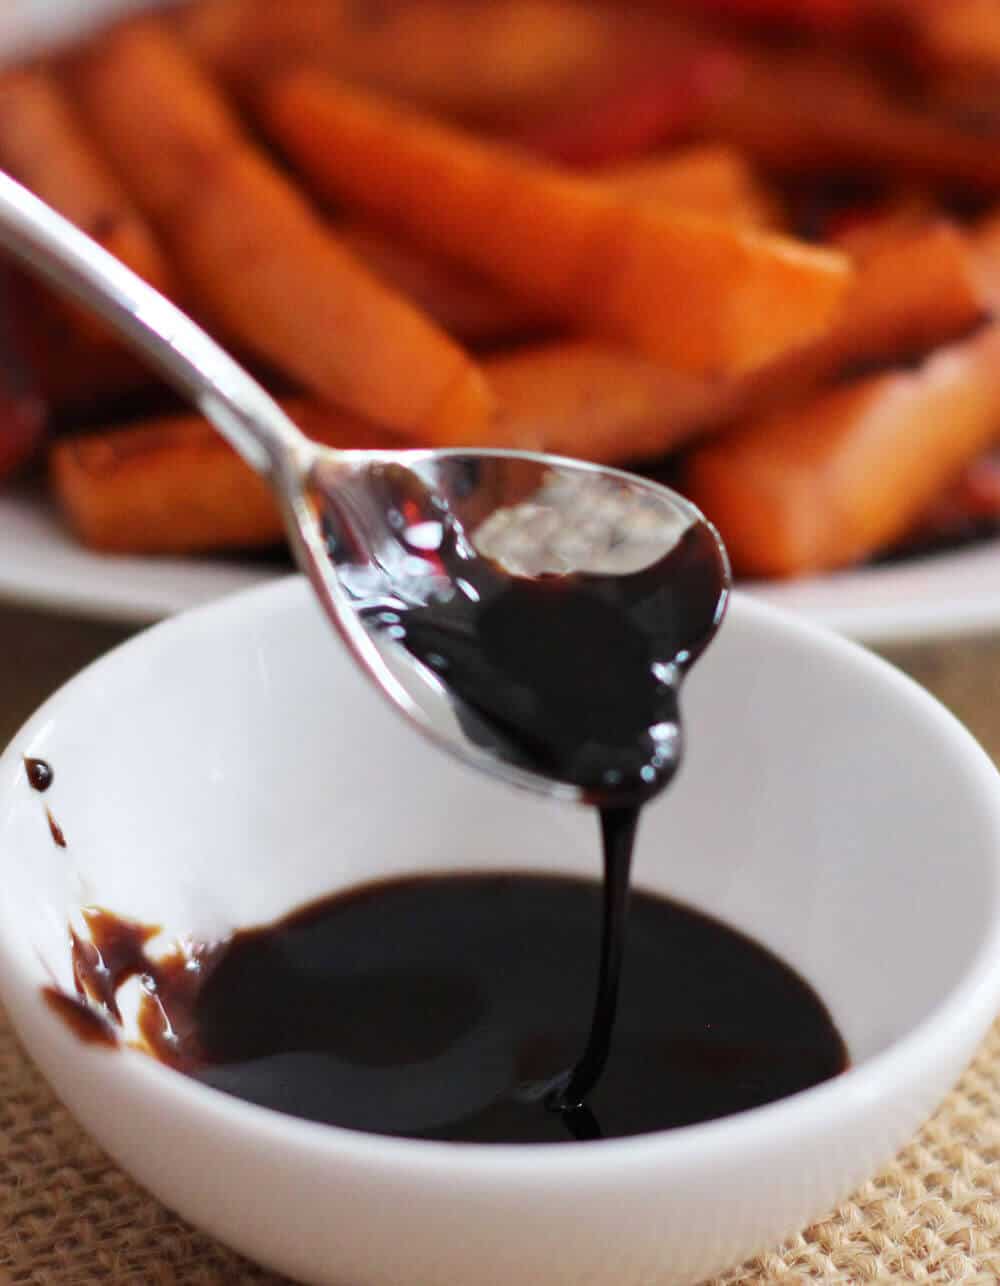 How to make sugar-free balsamic glaze in 10 minutes and with just one ingredient, balsamic vinegar